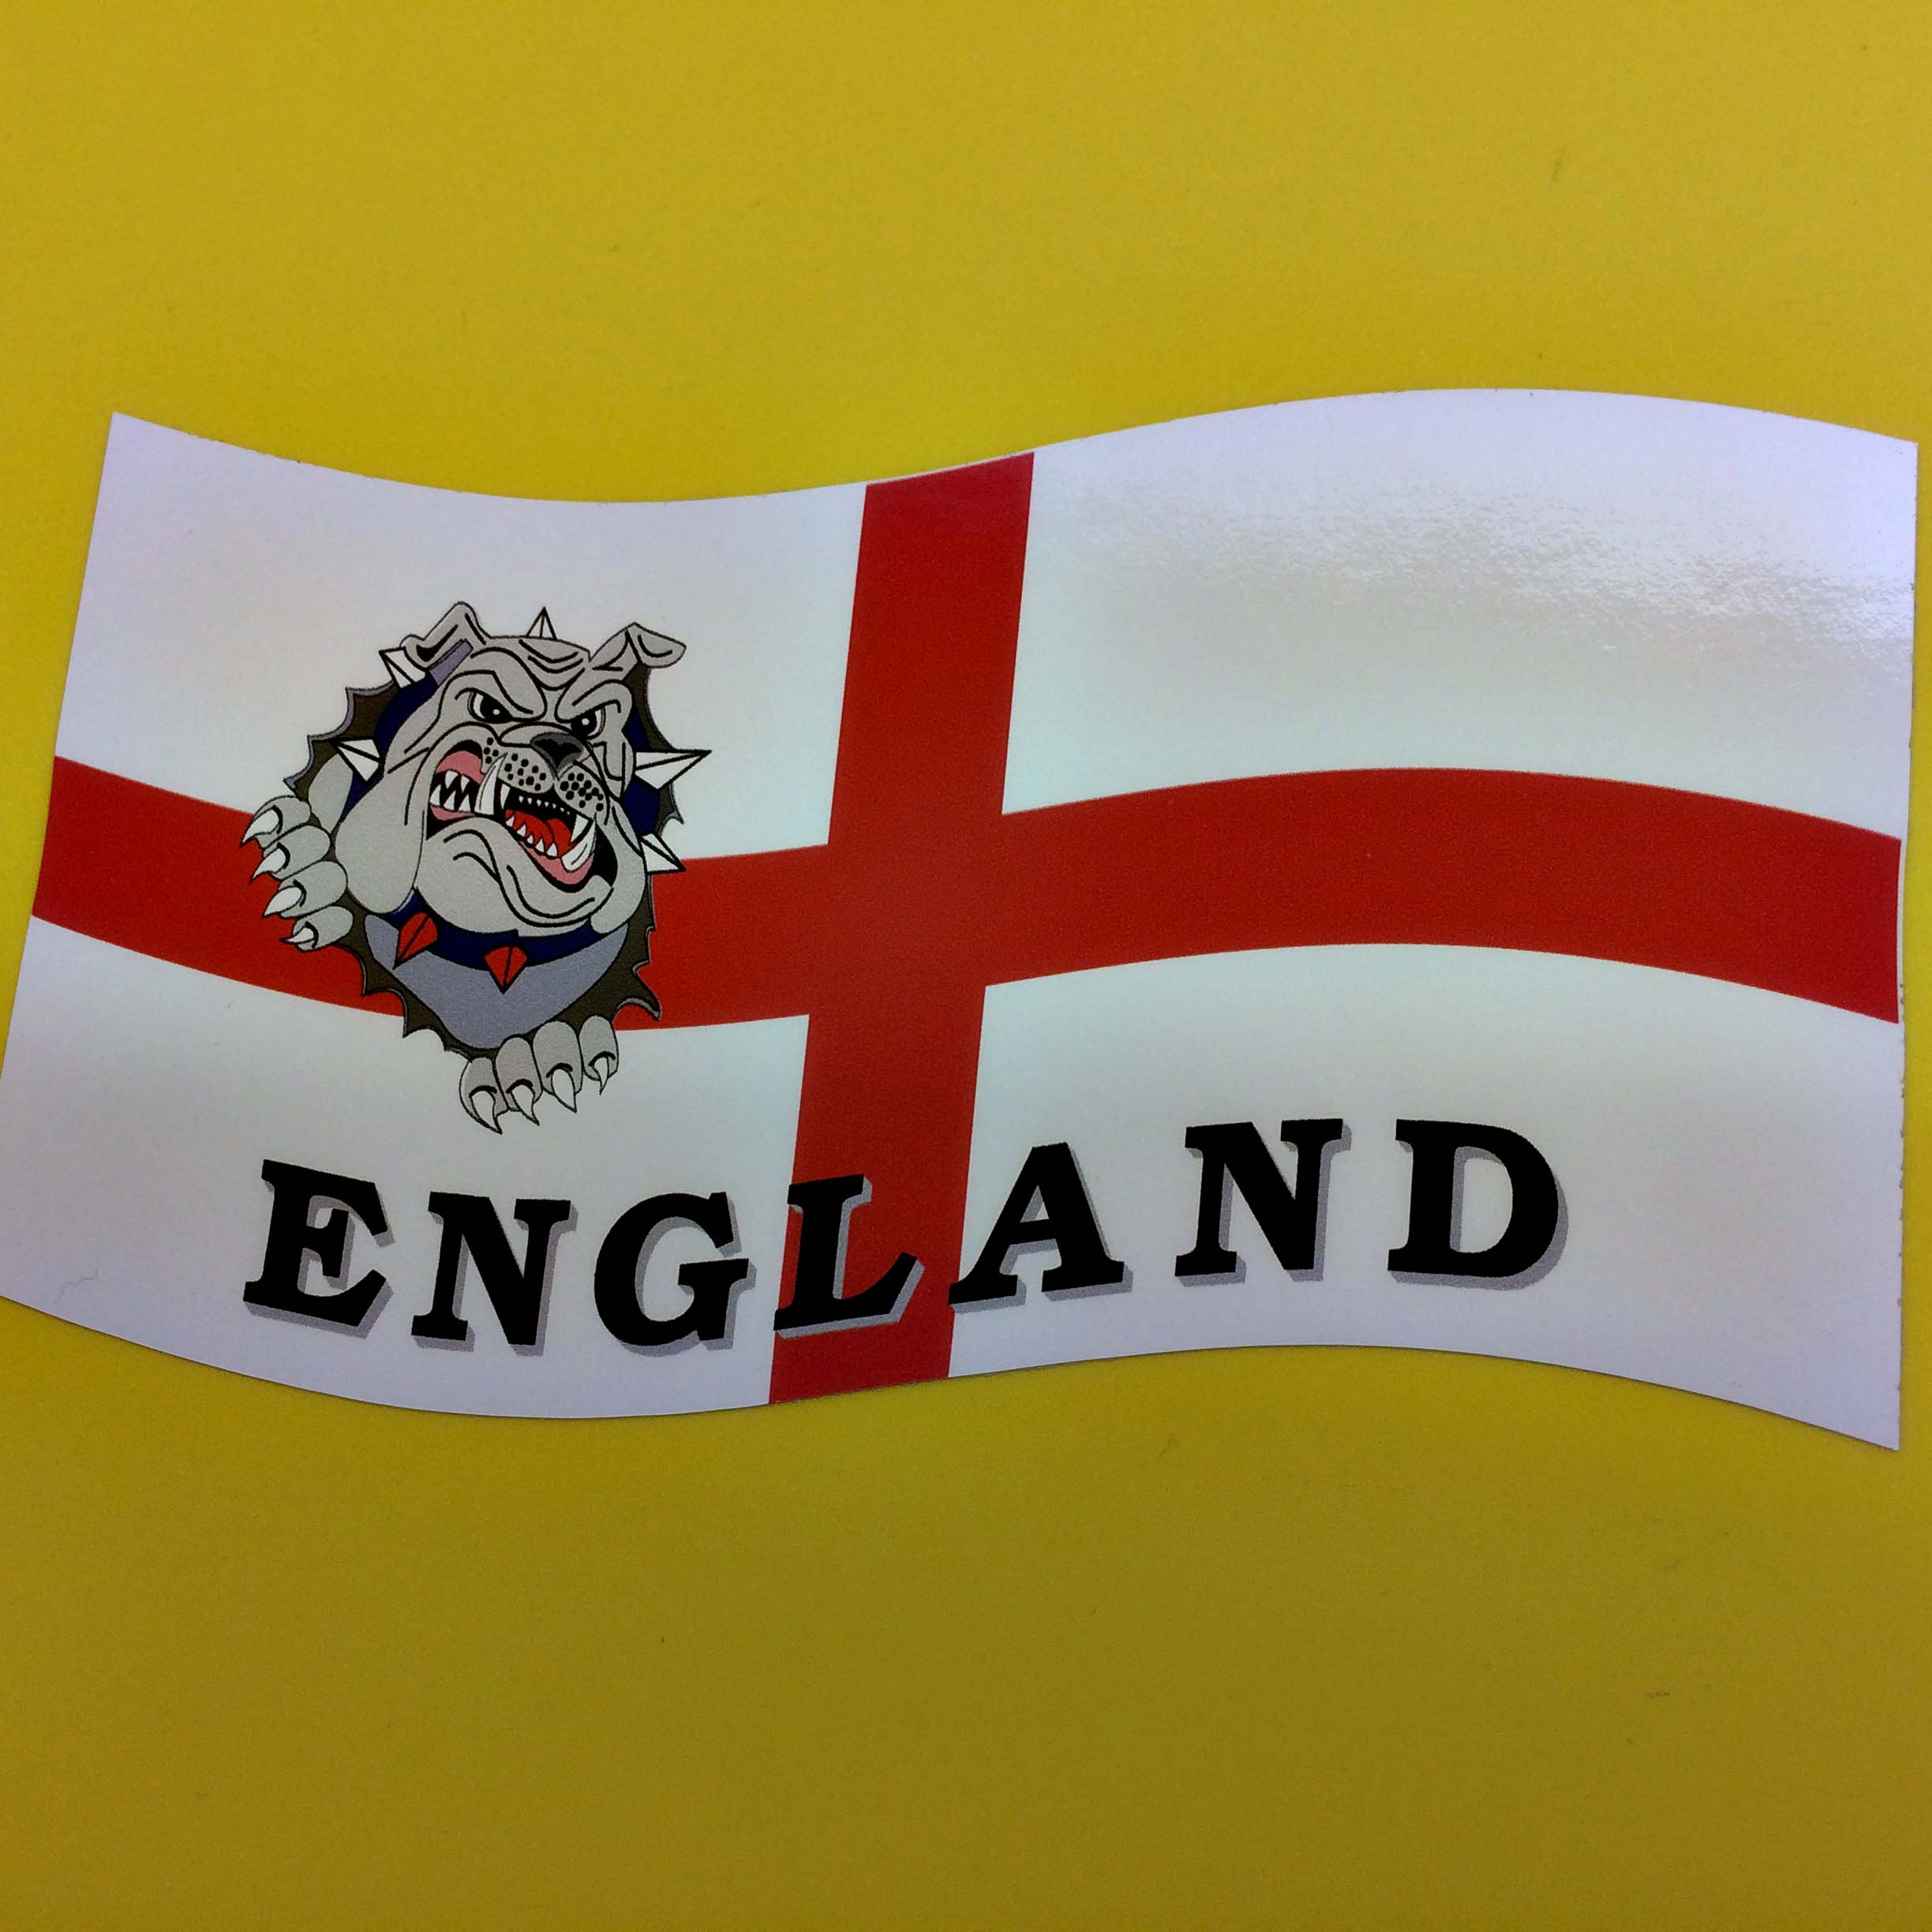 ENGLAND BULLDOG FLAG STICKER. An England flag; a red cross on a white field. Overlaying the flag is a bulldog and England in black lettering.